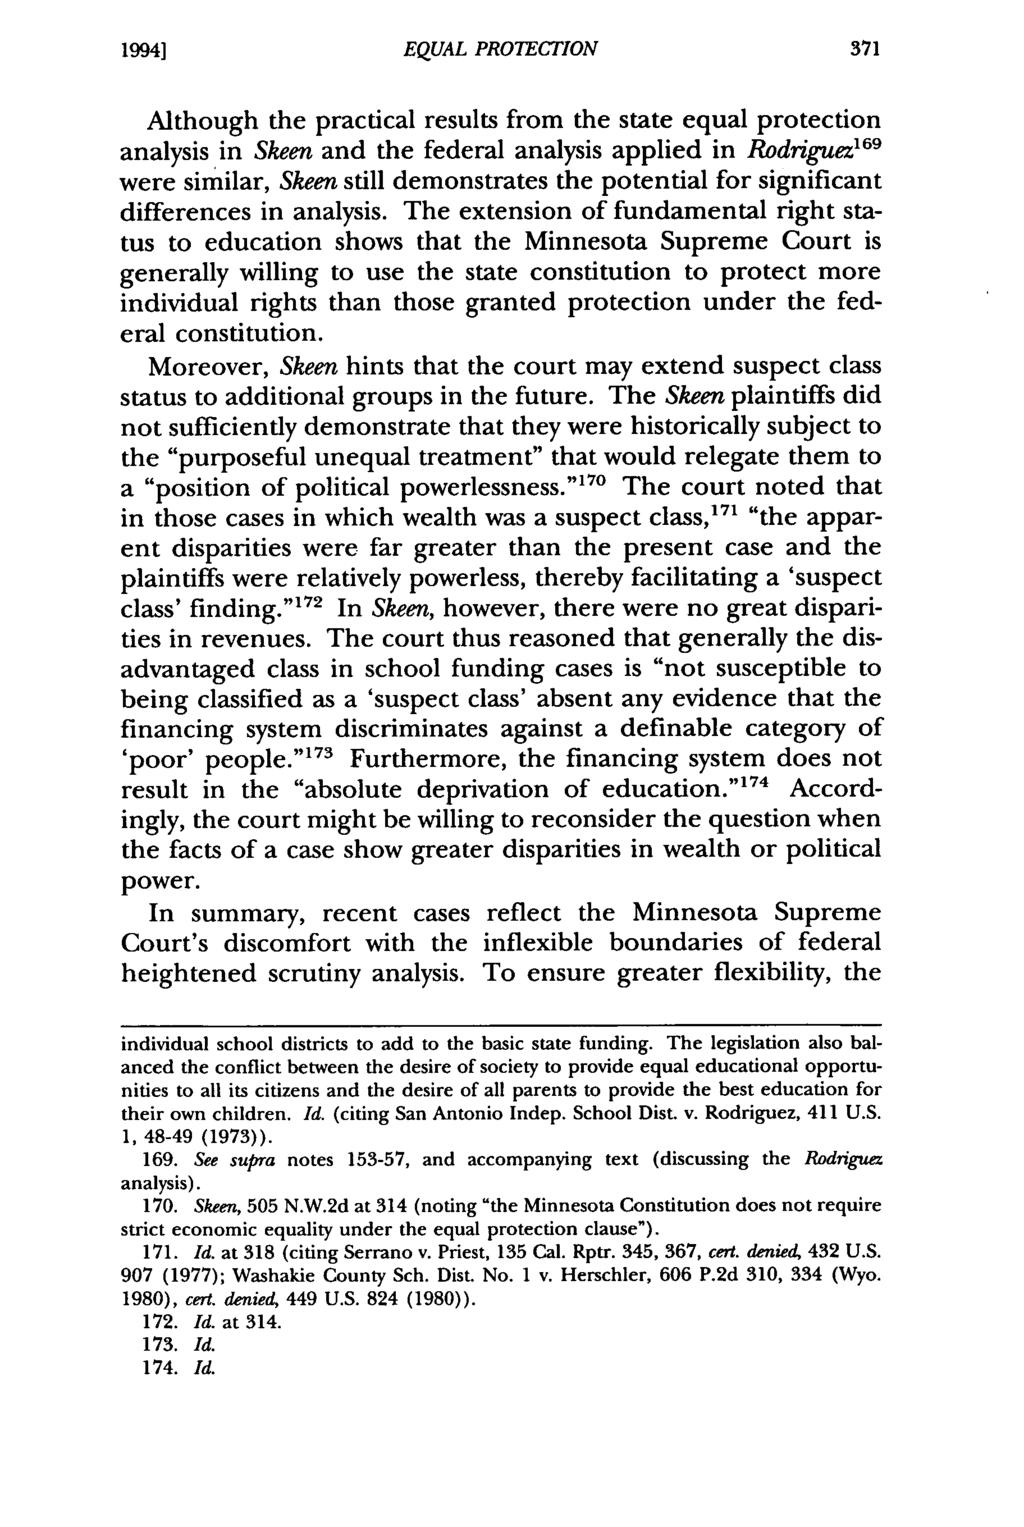 19941 Iijima: Minnesota Equal Protection EQUAL PROTECTION in the Third Millennium: "Old Formulat Although the practical results from the state equal protection analysis in Skeen and the federal